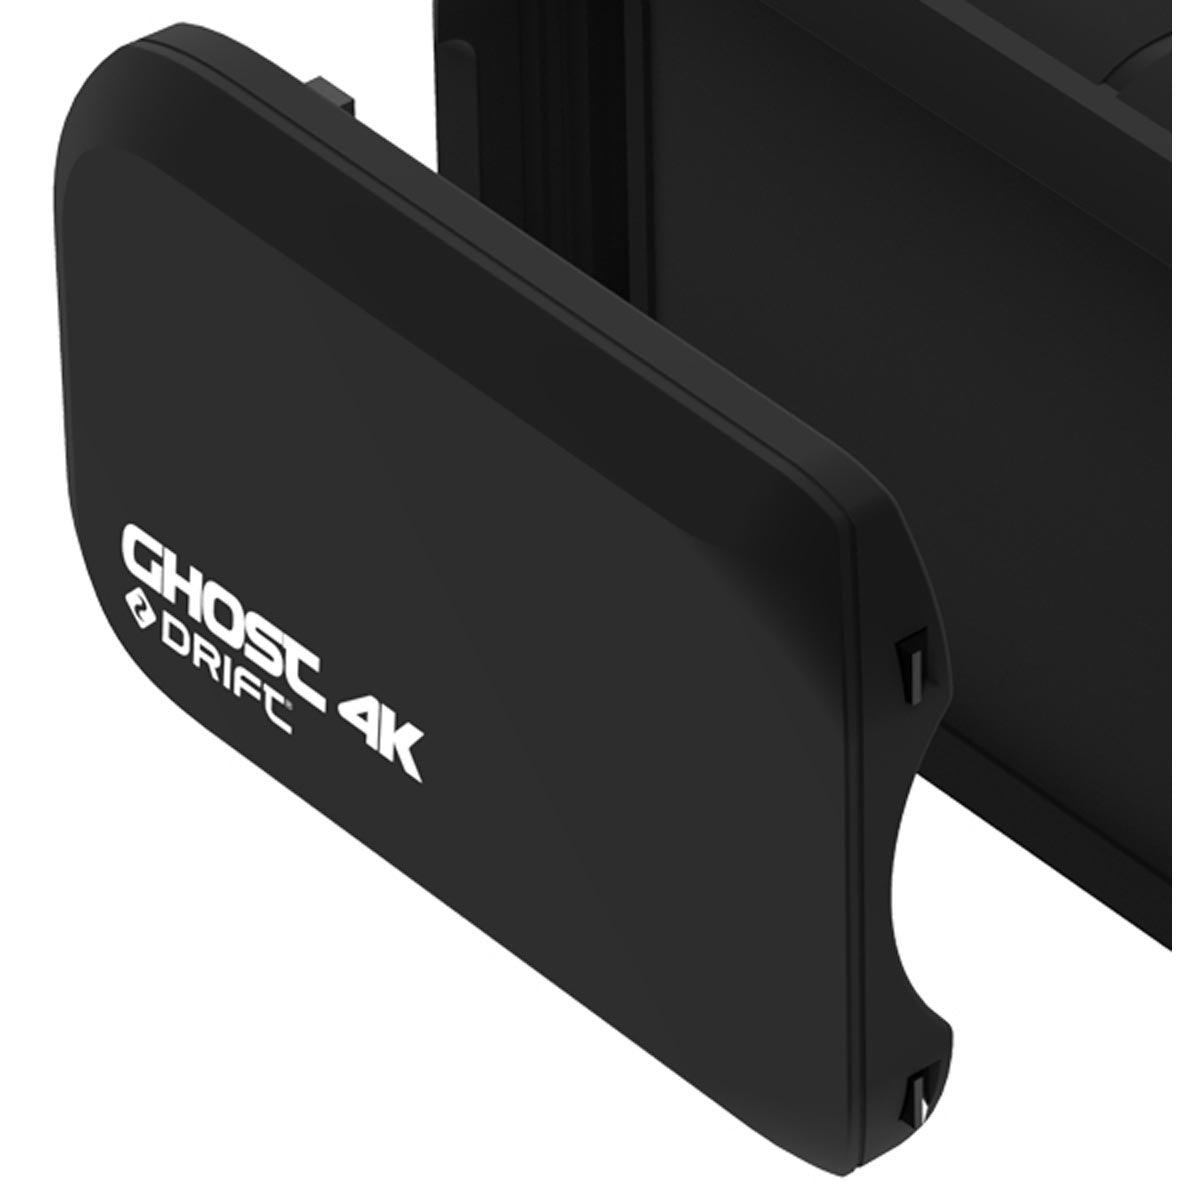 Drift 4K / 4K+ / Ghost X Extended Battery (1500 MAH) - Black - Browse our range of Accessories: Camera - getgearedshop 